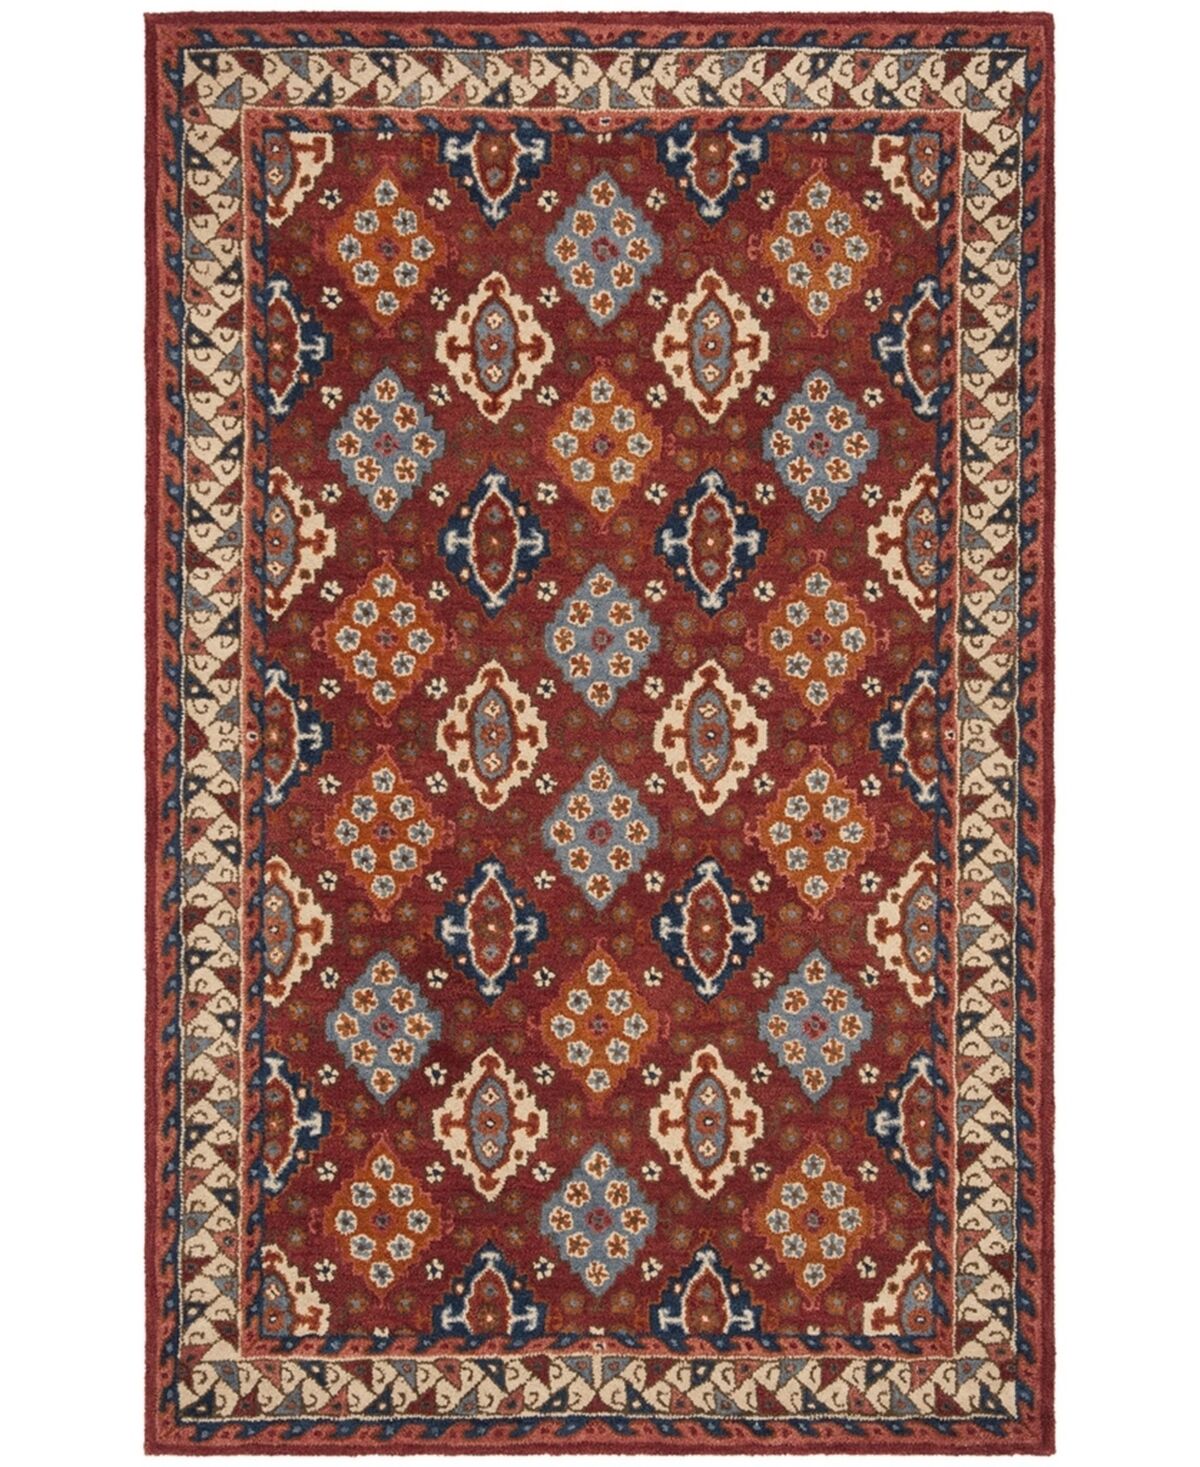 Safavieh Antiquity At509 Red and Blue 5' x 8' Area Rug - Red